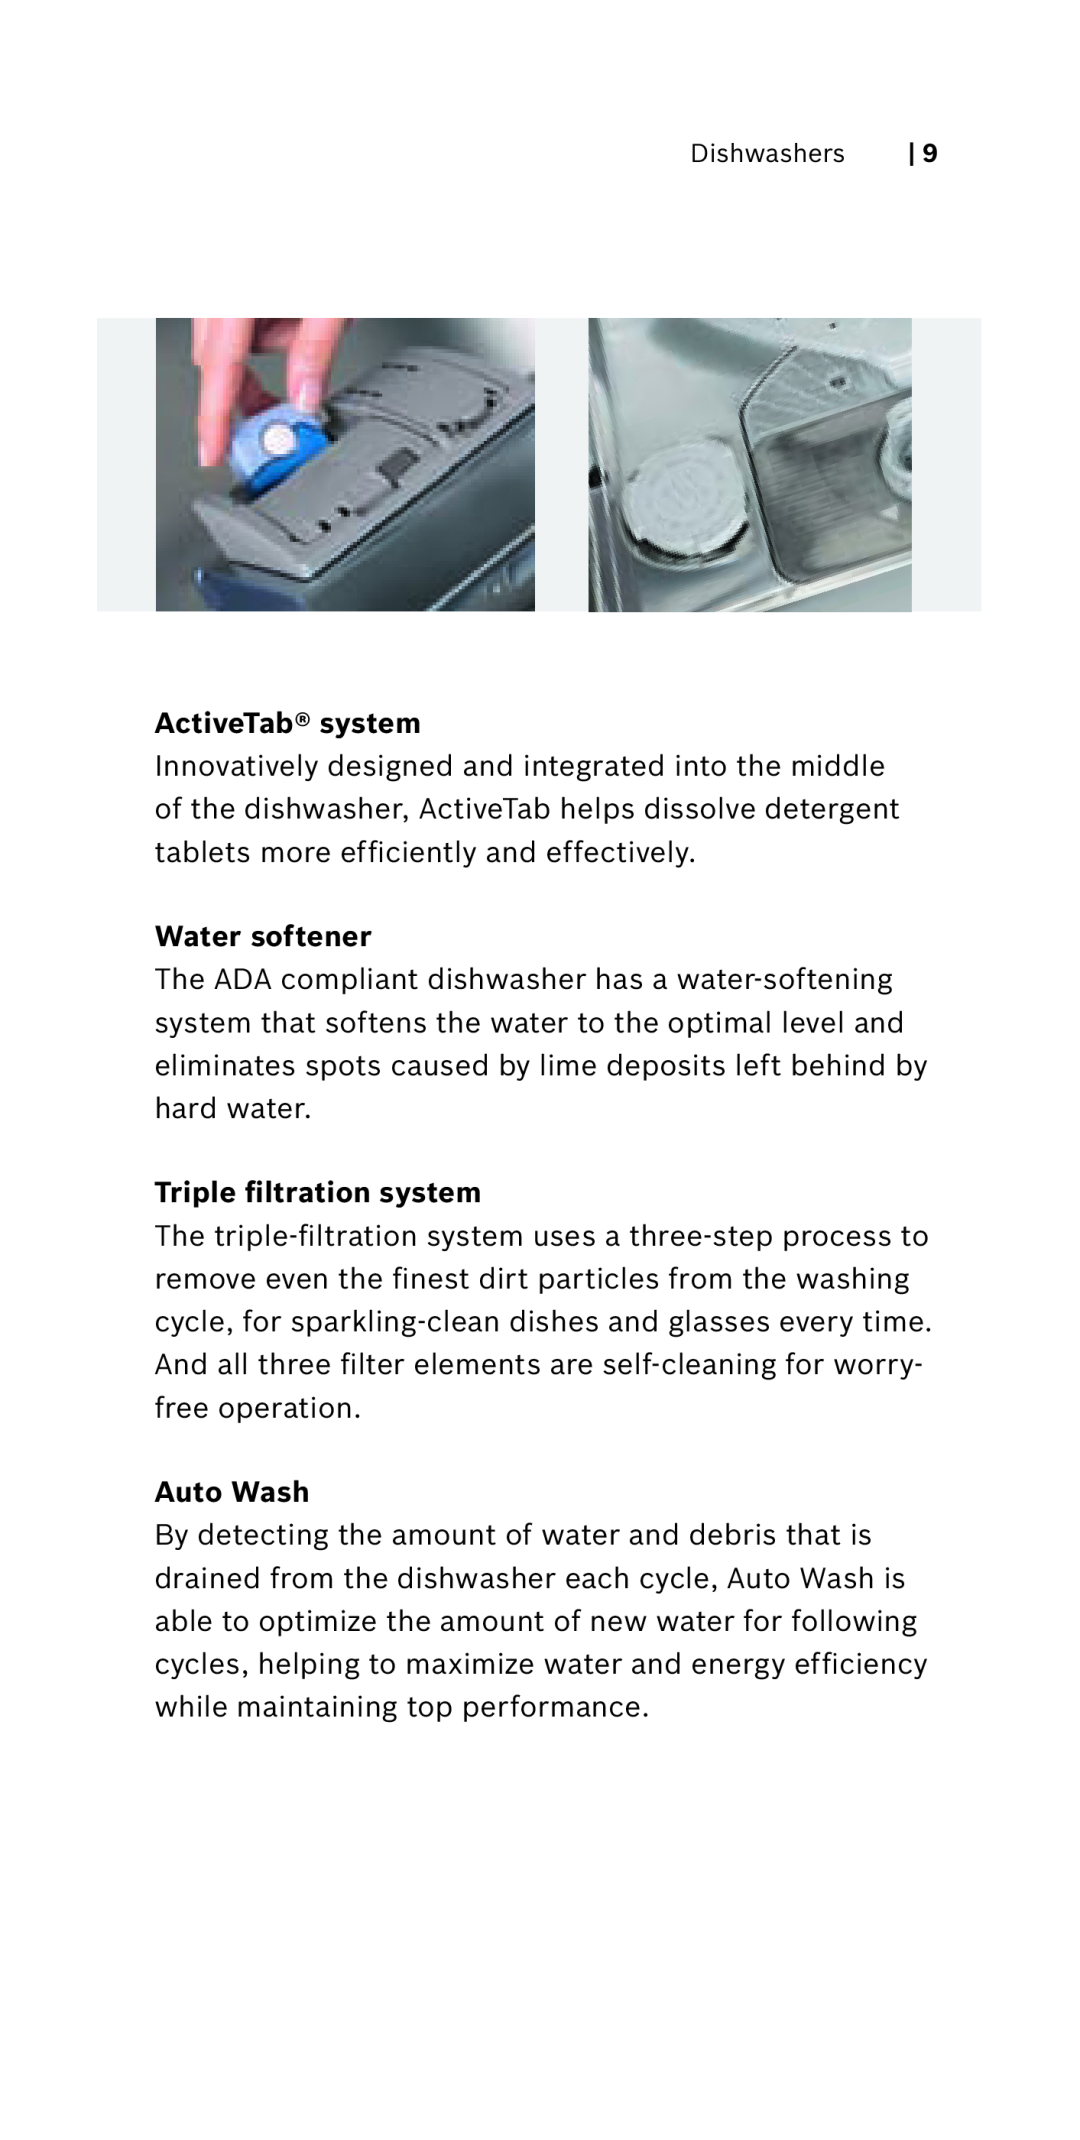 Bosch Appliances 800 Series manual ActiveTab system, Water softener, Triple filtration system, Auto Wash 